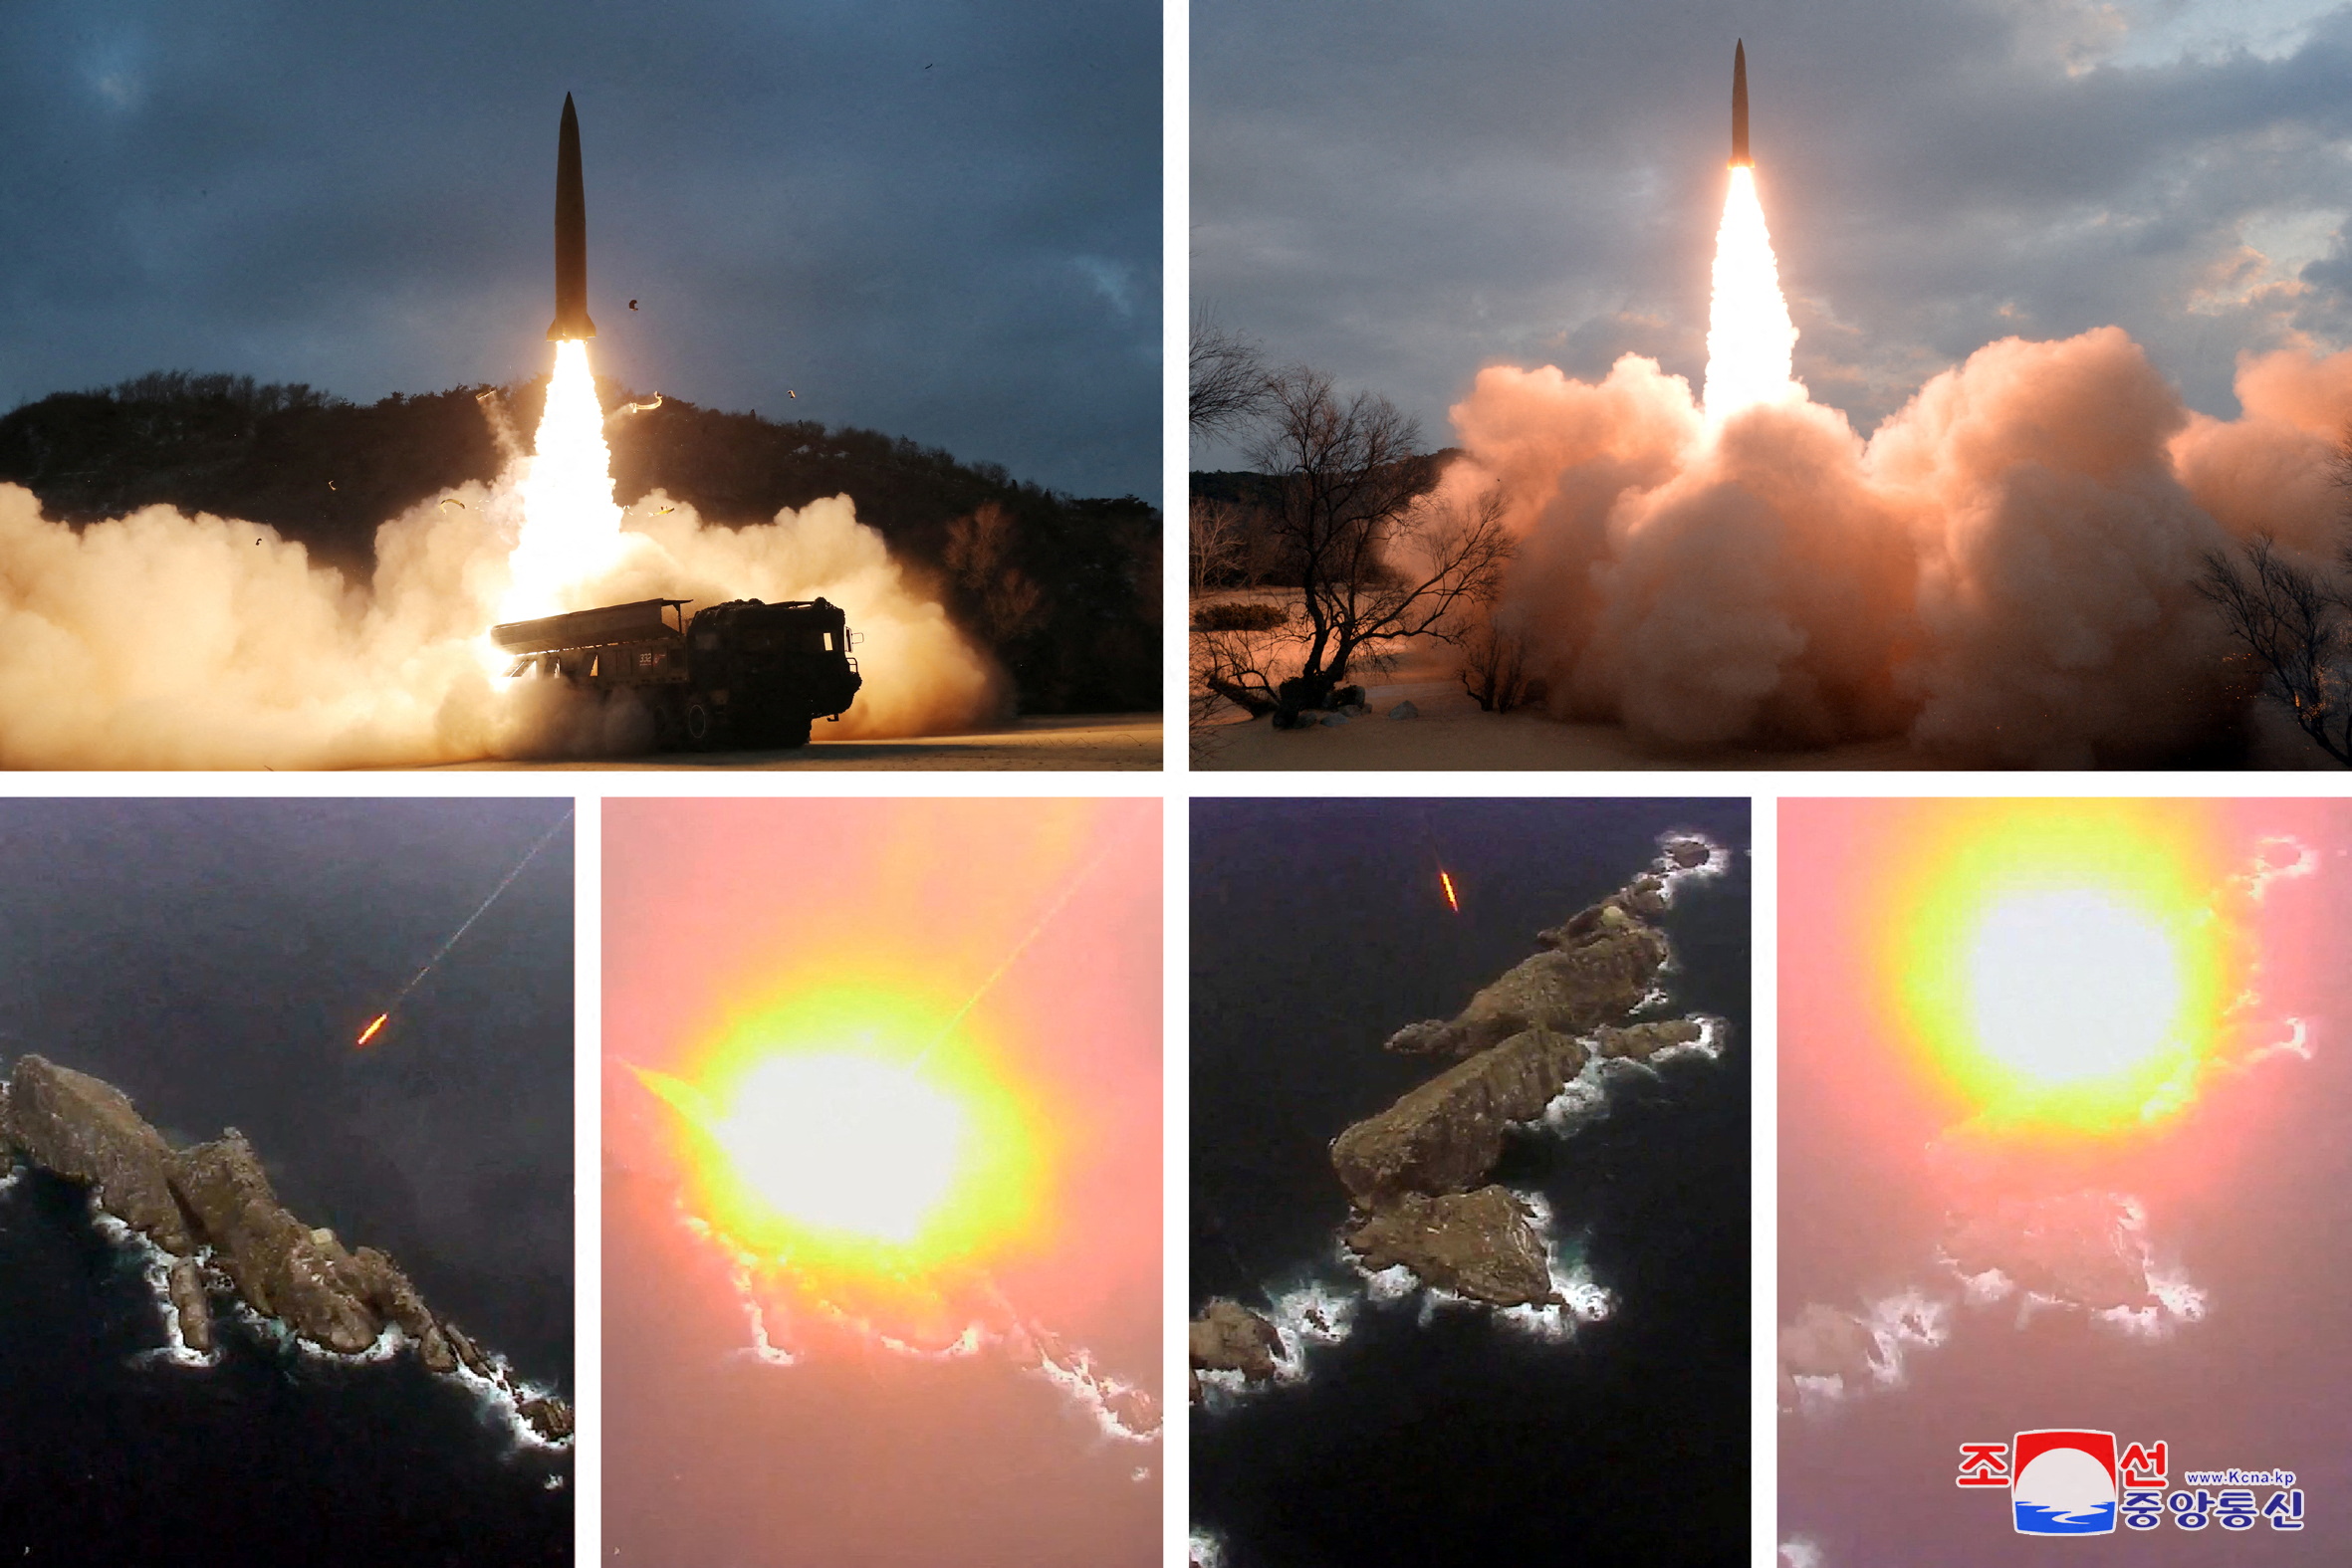 A combination image shows a missile test that state media KCNA says was conducted this week at undisclosed locations in North Korea